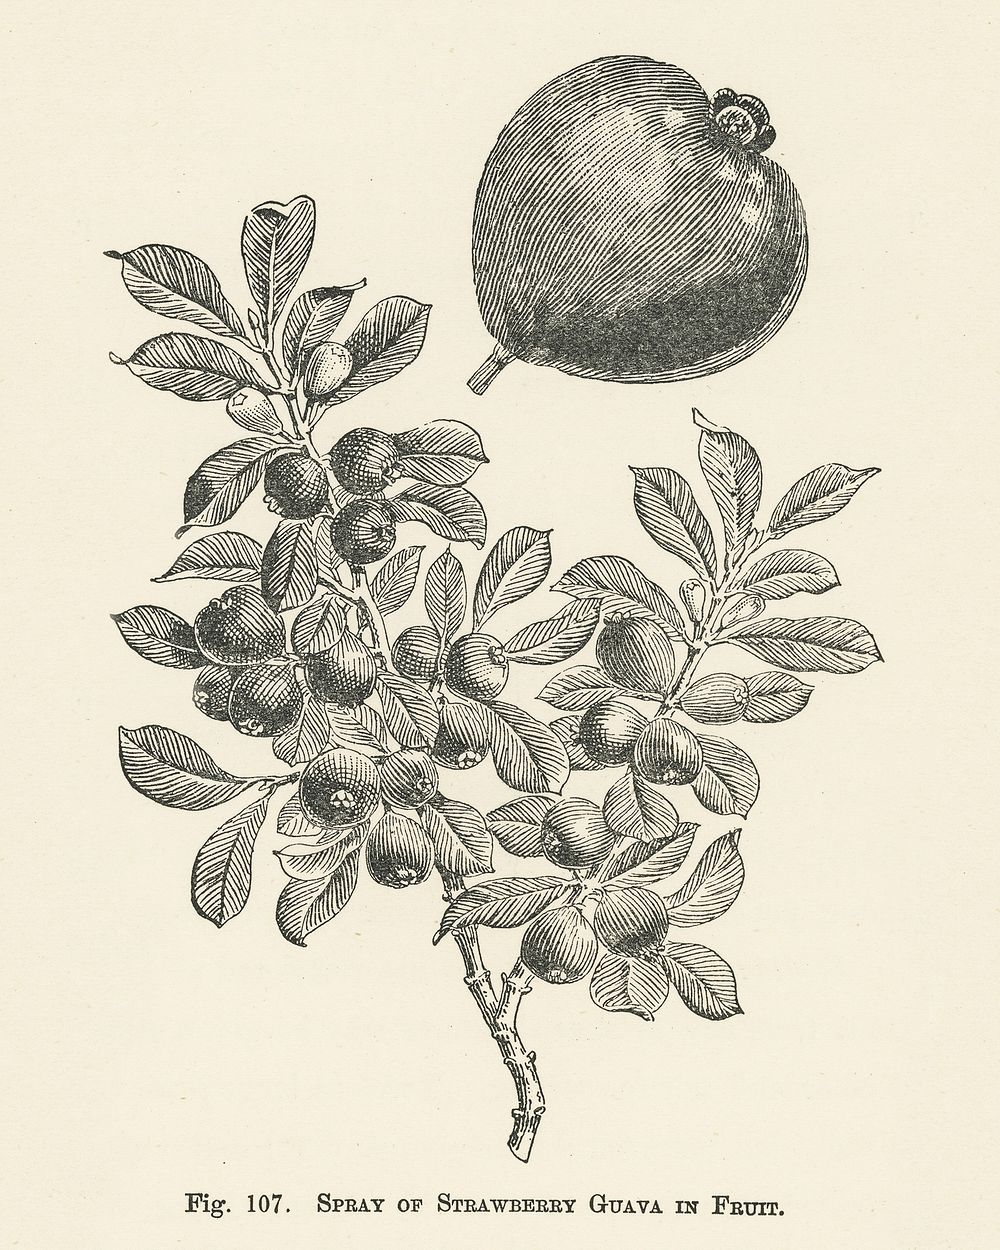 Vintage illustration of strawberry guava digitally enhanced from our own vintage edition of The Fruit Grower's Guide (1891)…